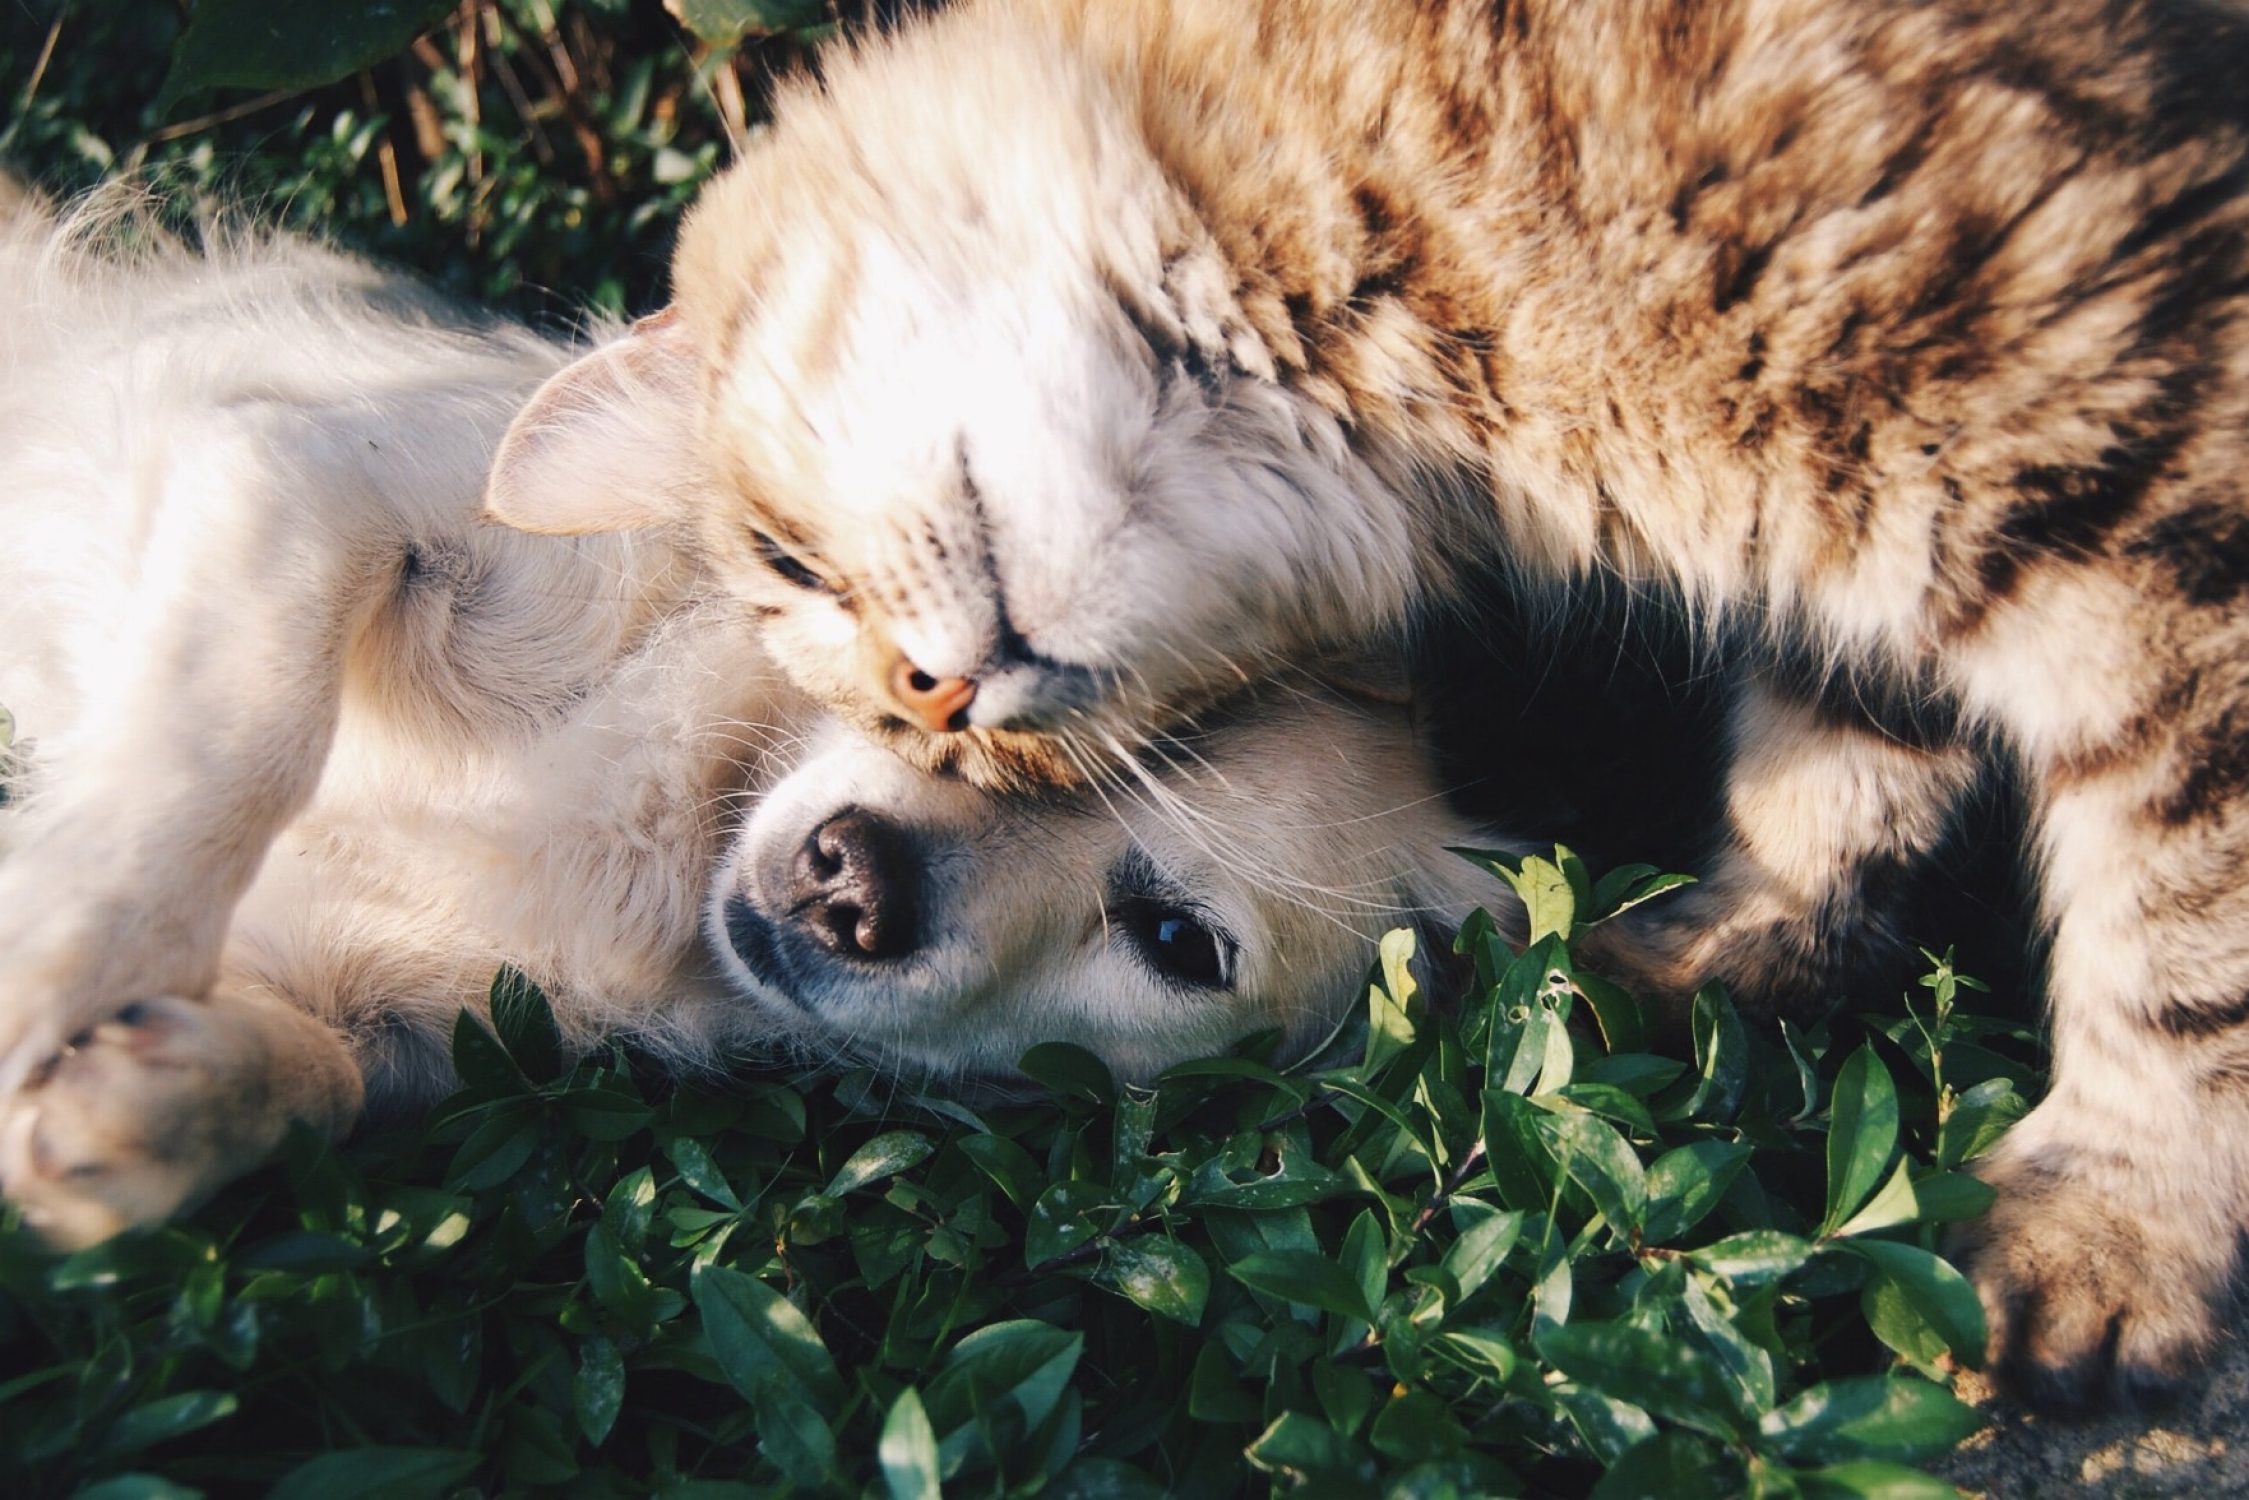 A cat and a dog are cuddelling on grass.